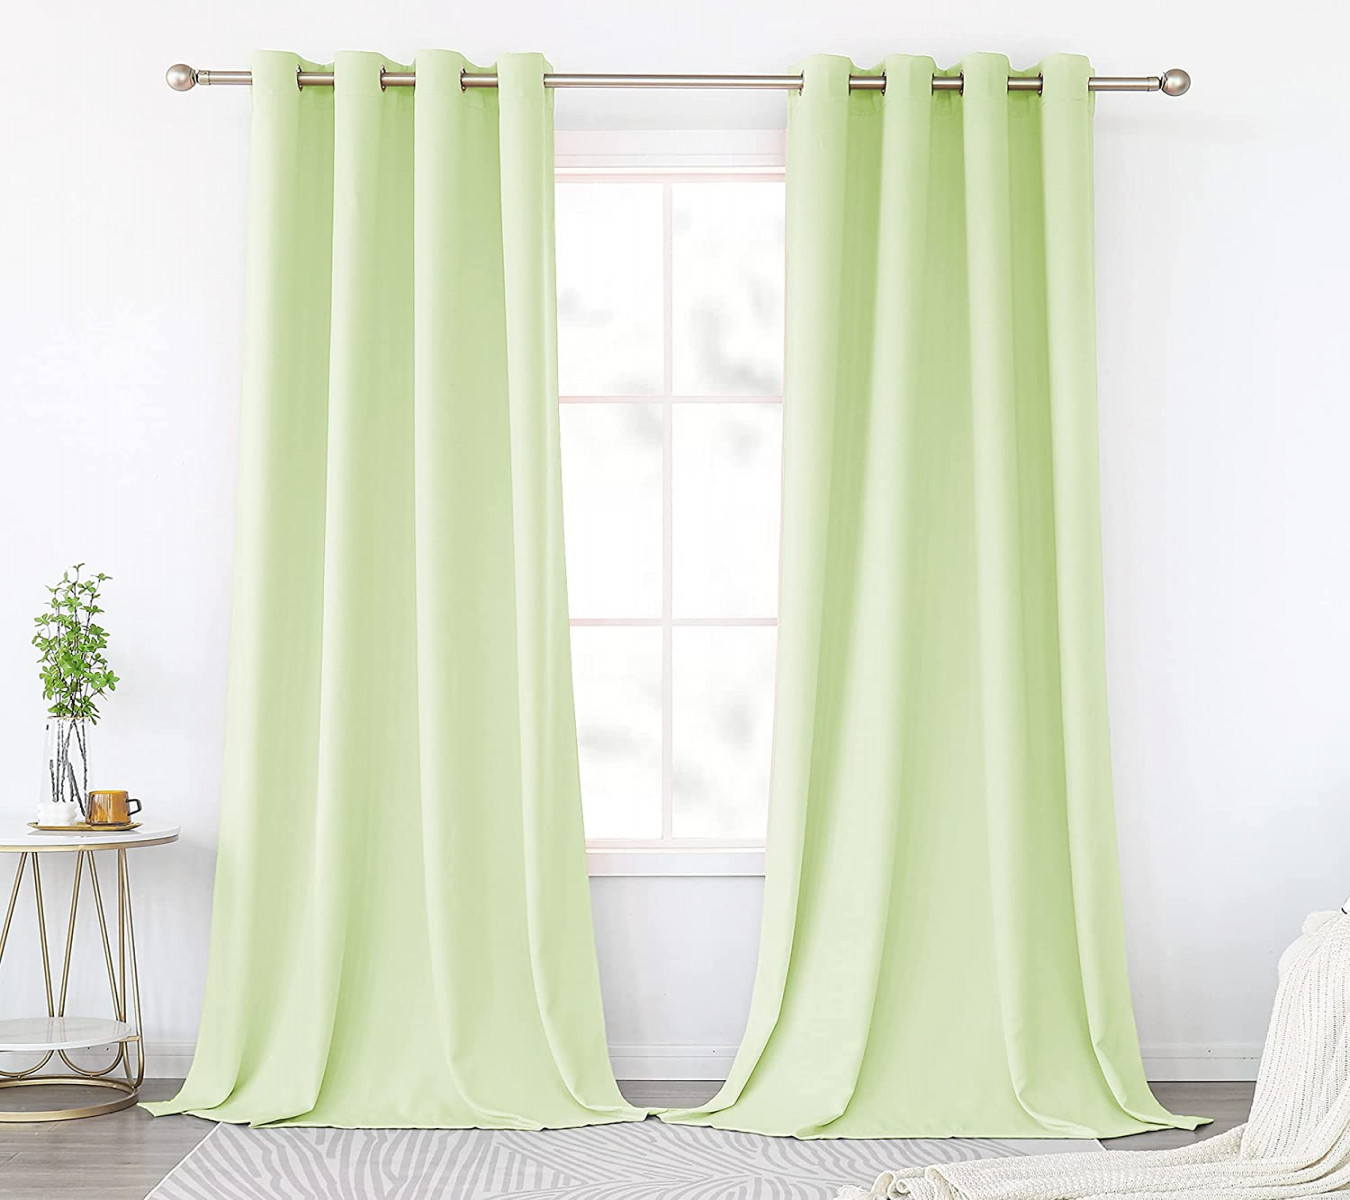 Blackout Curtains Mint Green  Inch Long for Living Room Bedroom Eyelet  Window Thermal Insulated Light Green Curtain Panels  Story Houses Pack 5  x